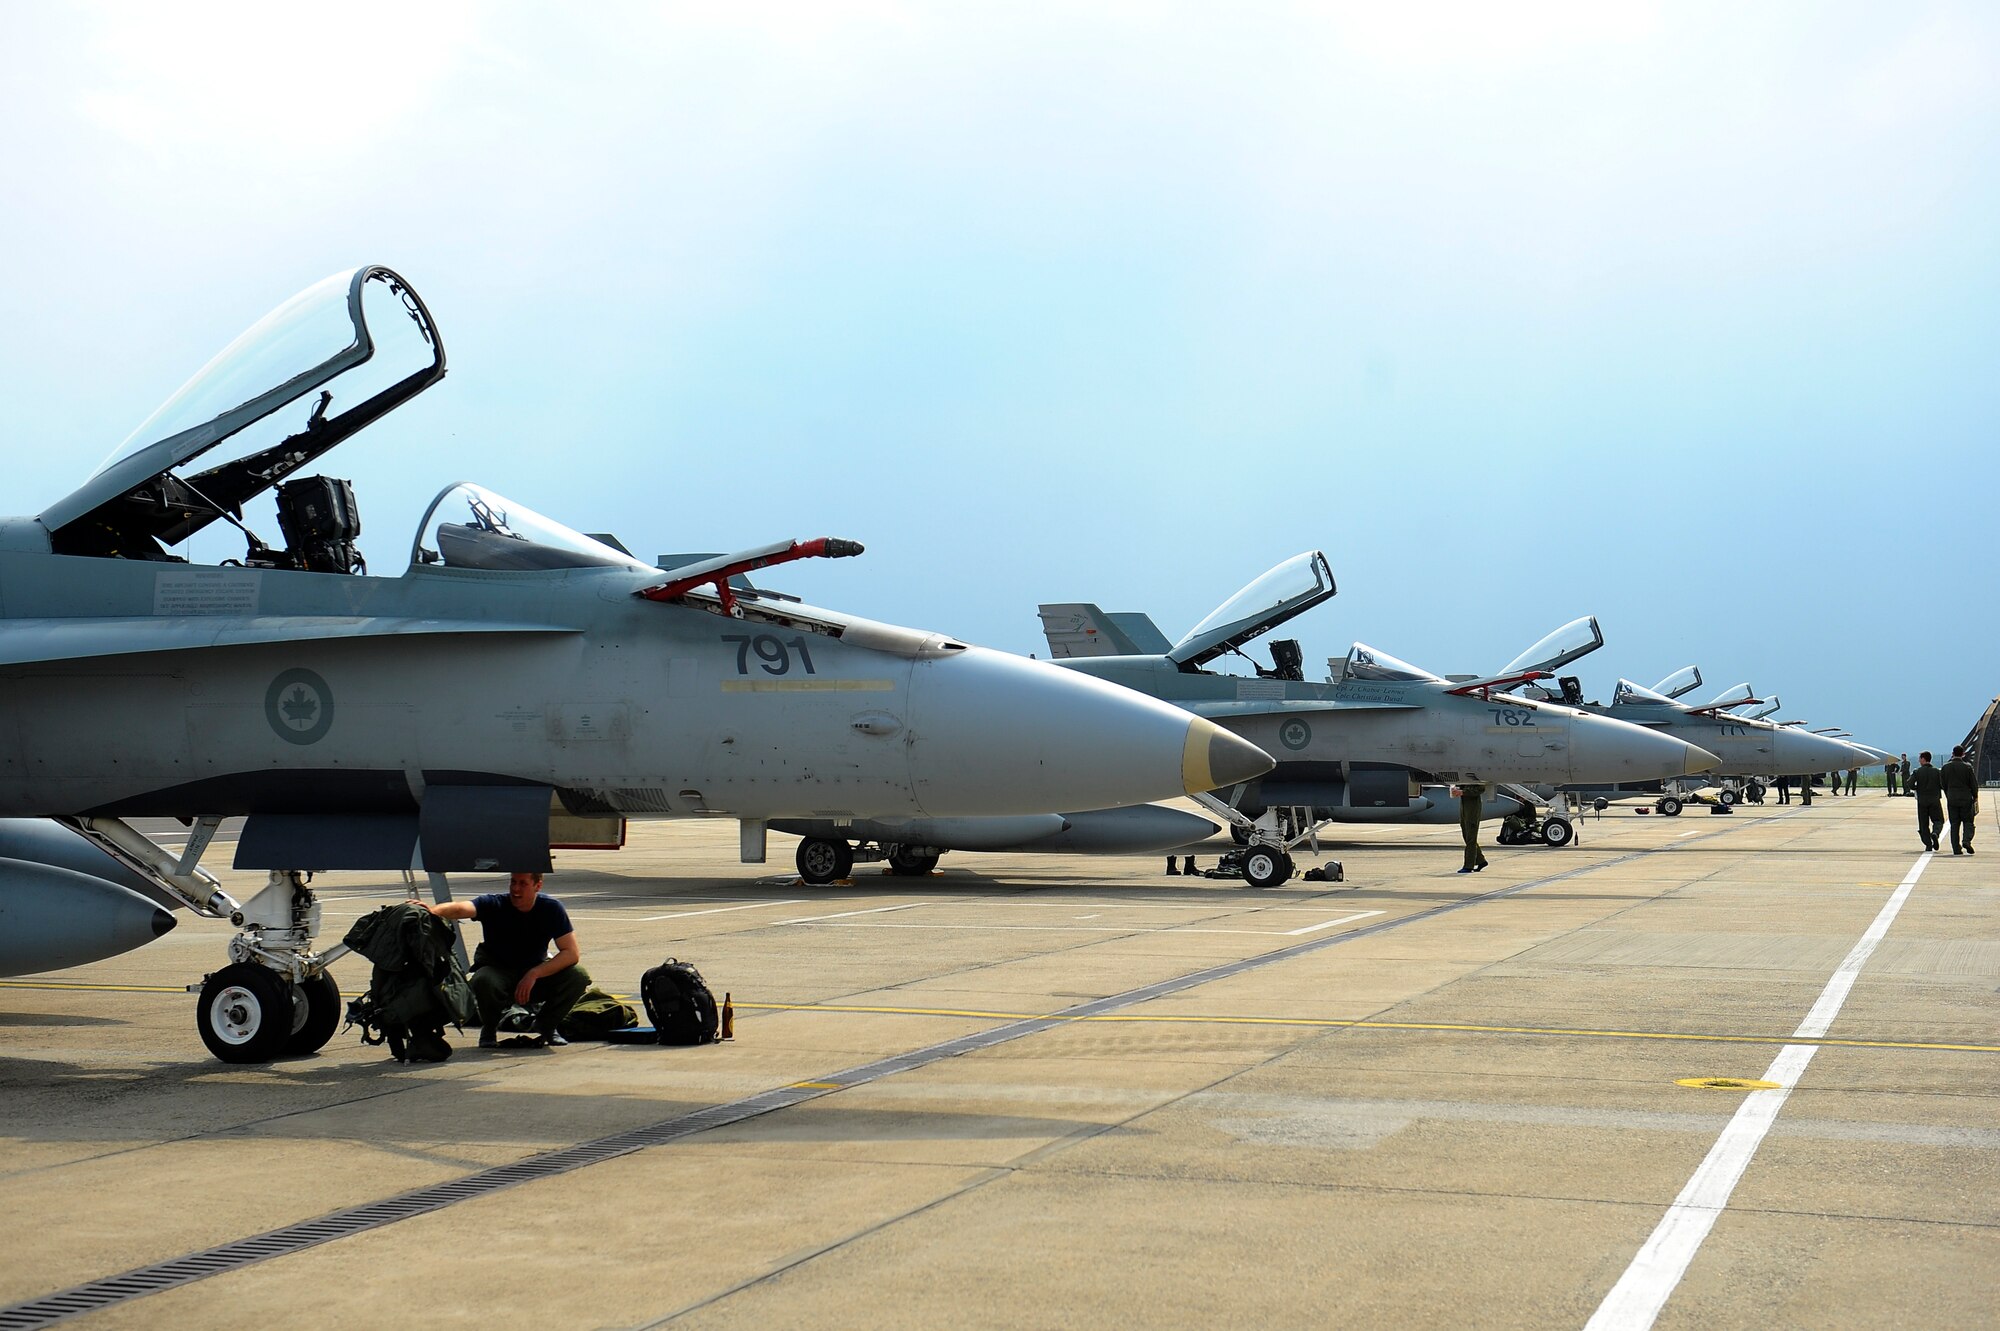 Royal Canadian Air Force CF-18 fighter aircraft are parked on the flightline May 1, 2014, at Spangdahlem Air Base, Germany. The Canadian Armed Forces are one of the major contributors to NATO operations since the founding of the Alliance 65 years ago. The 52nd Fighter Wing and the 726th Air Mobility Squadron continuously strengthen NATO partnerships by providing logistics and support during allied operations. (U.S. Air Force photo by Senior Airman Rusty Frank/Released) 